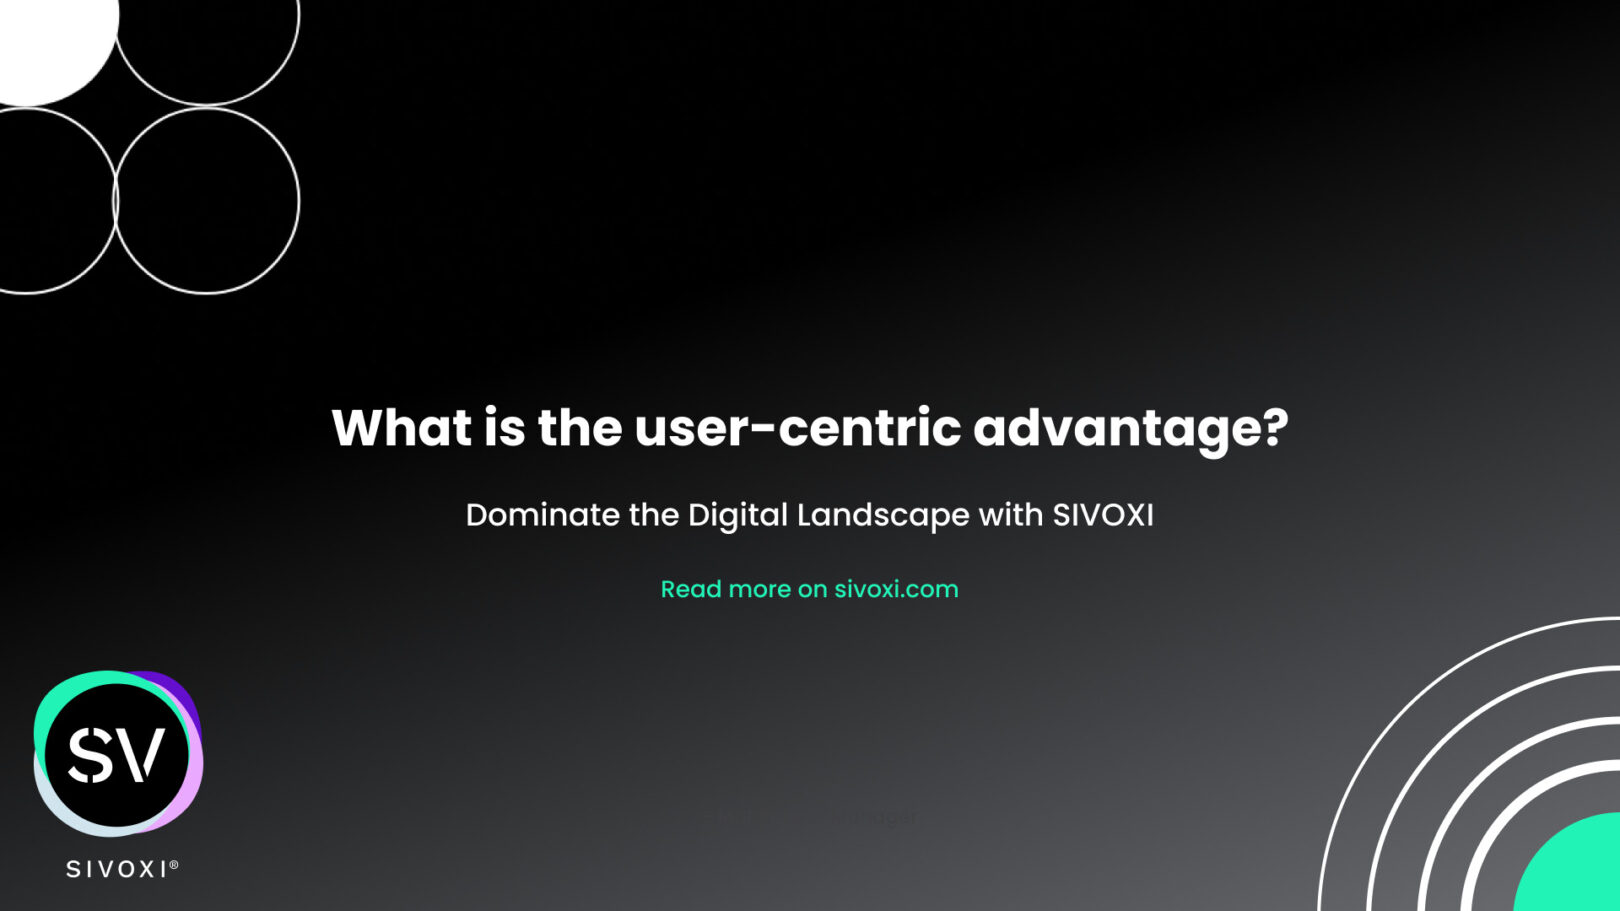 what is the user-centric advantage? Dominate the digital landscape wit this secret tool.